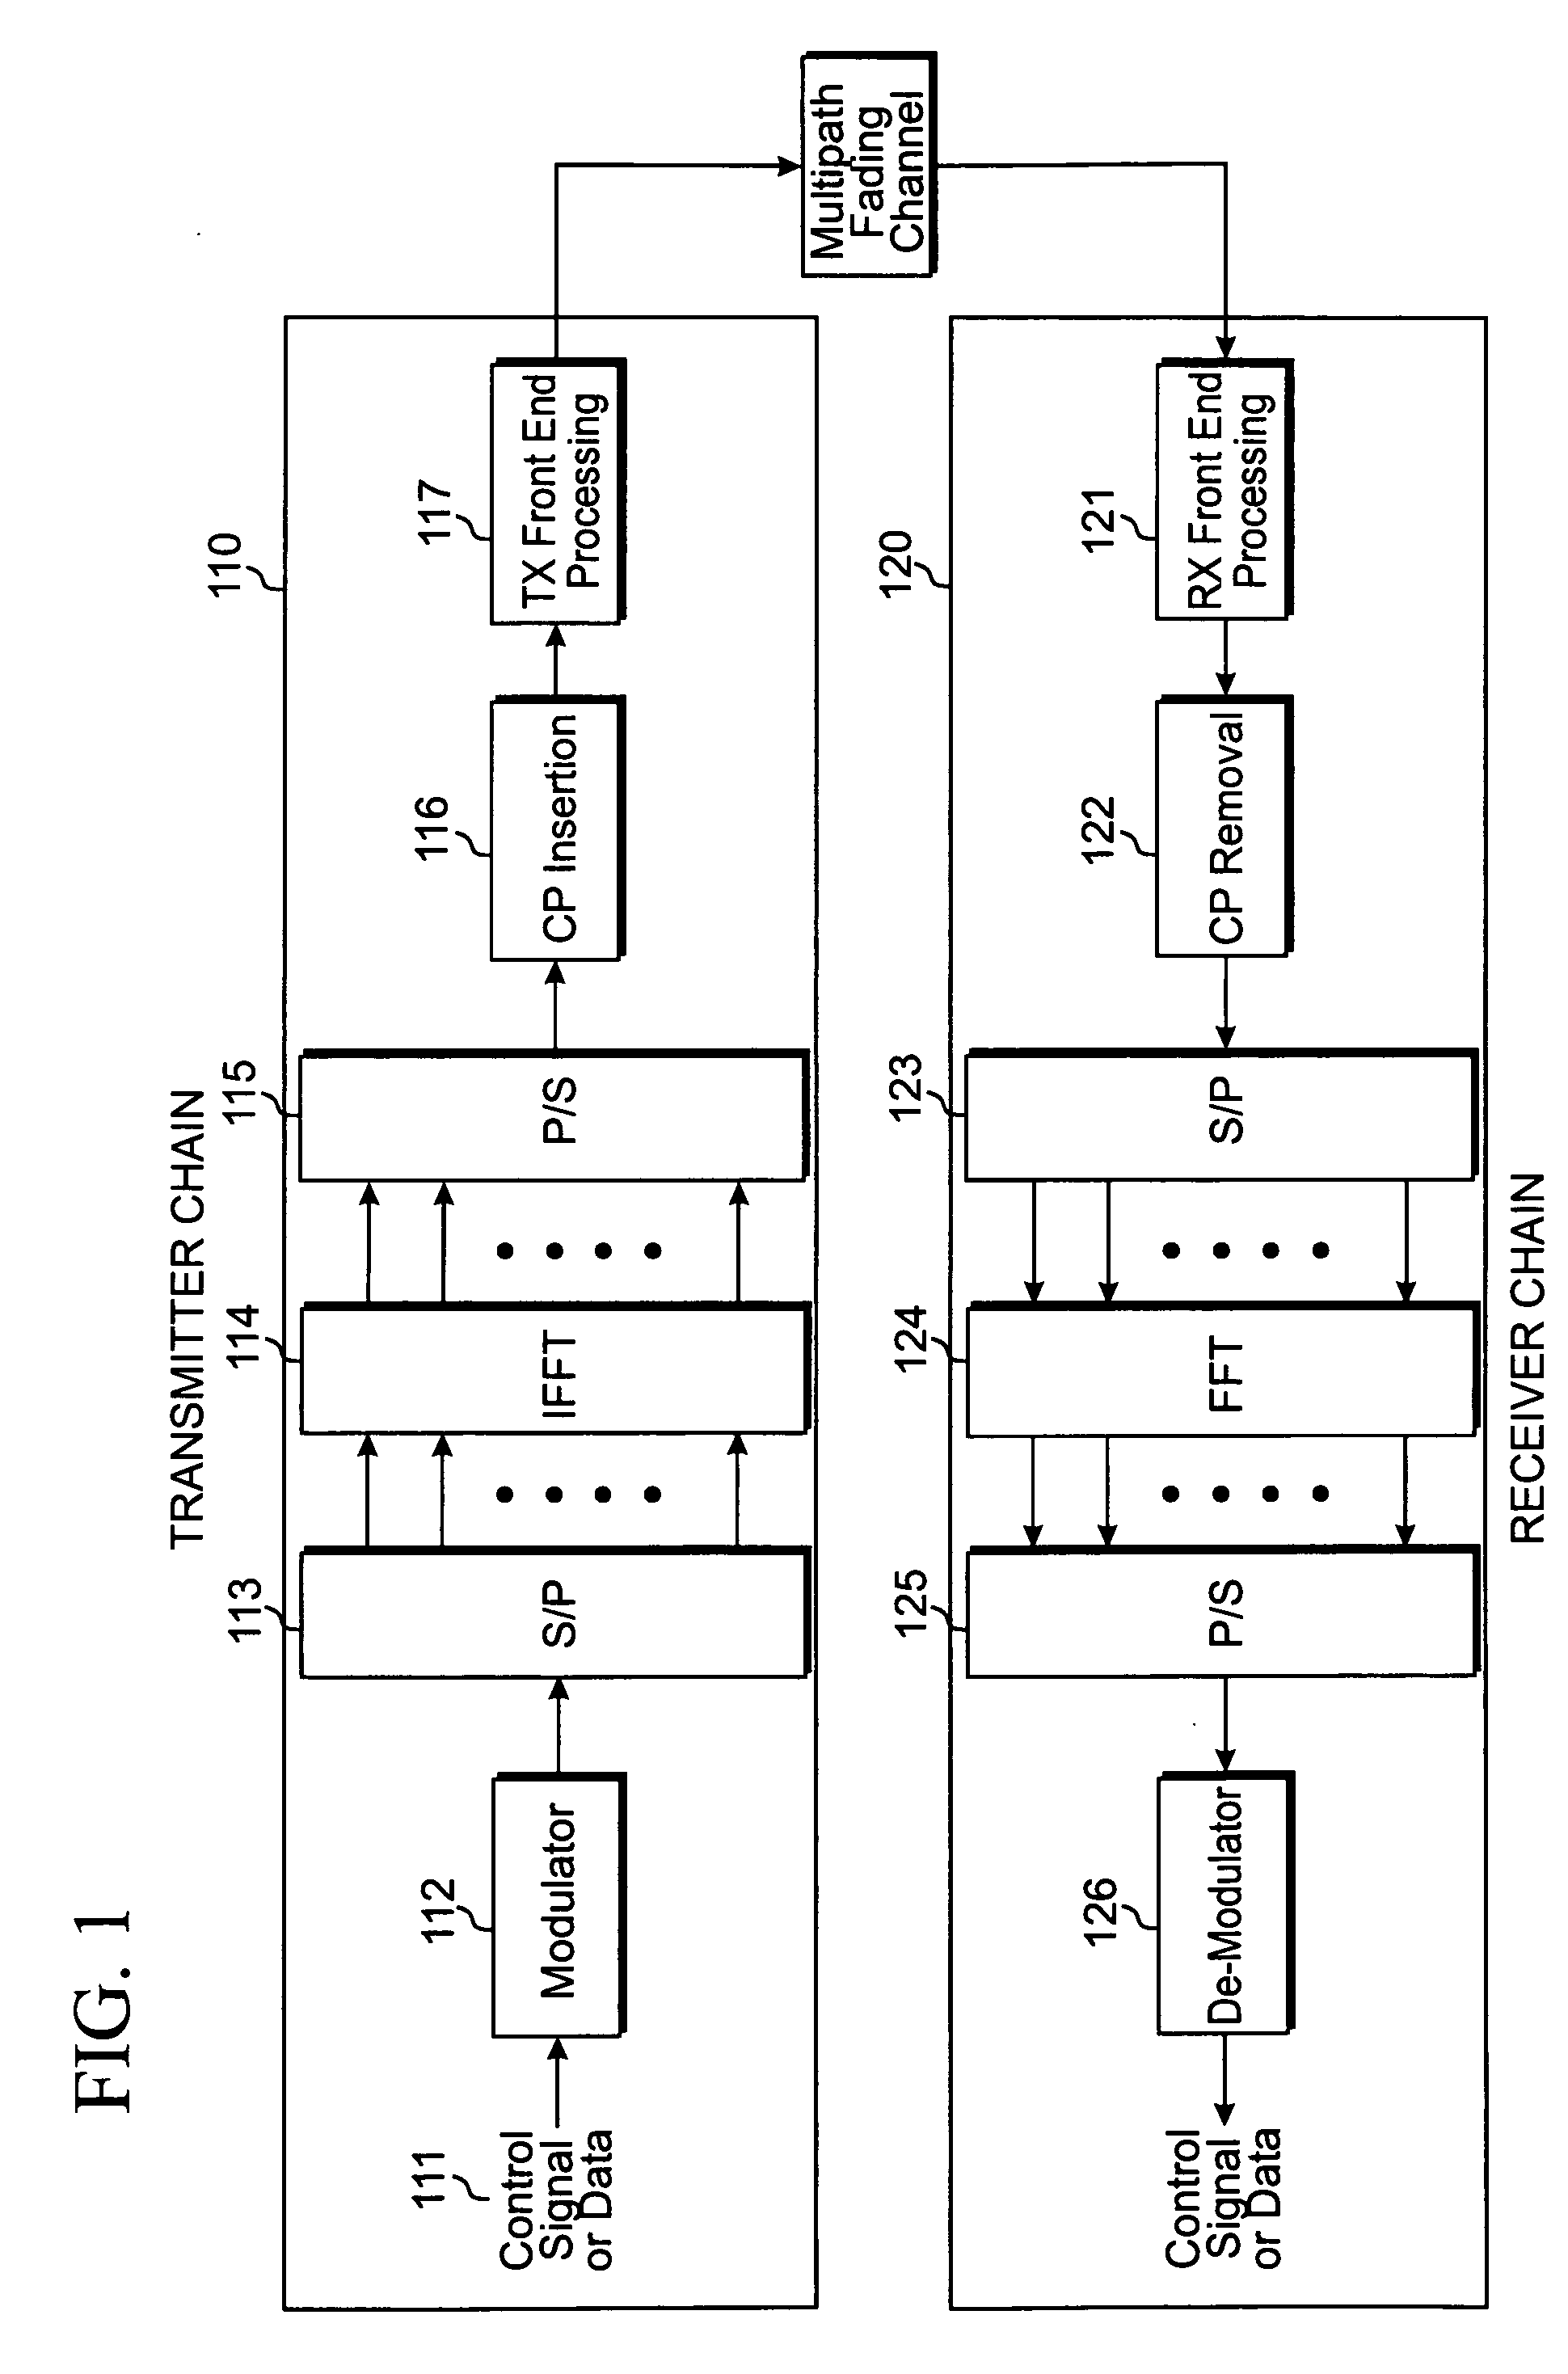 Antenna mapping in a MIMO wireless communication system